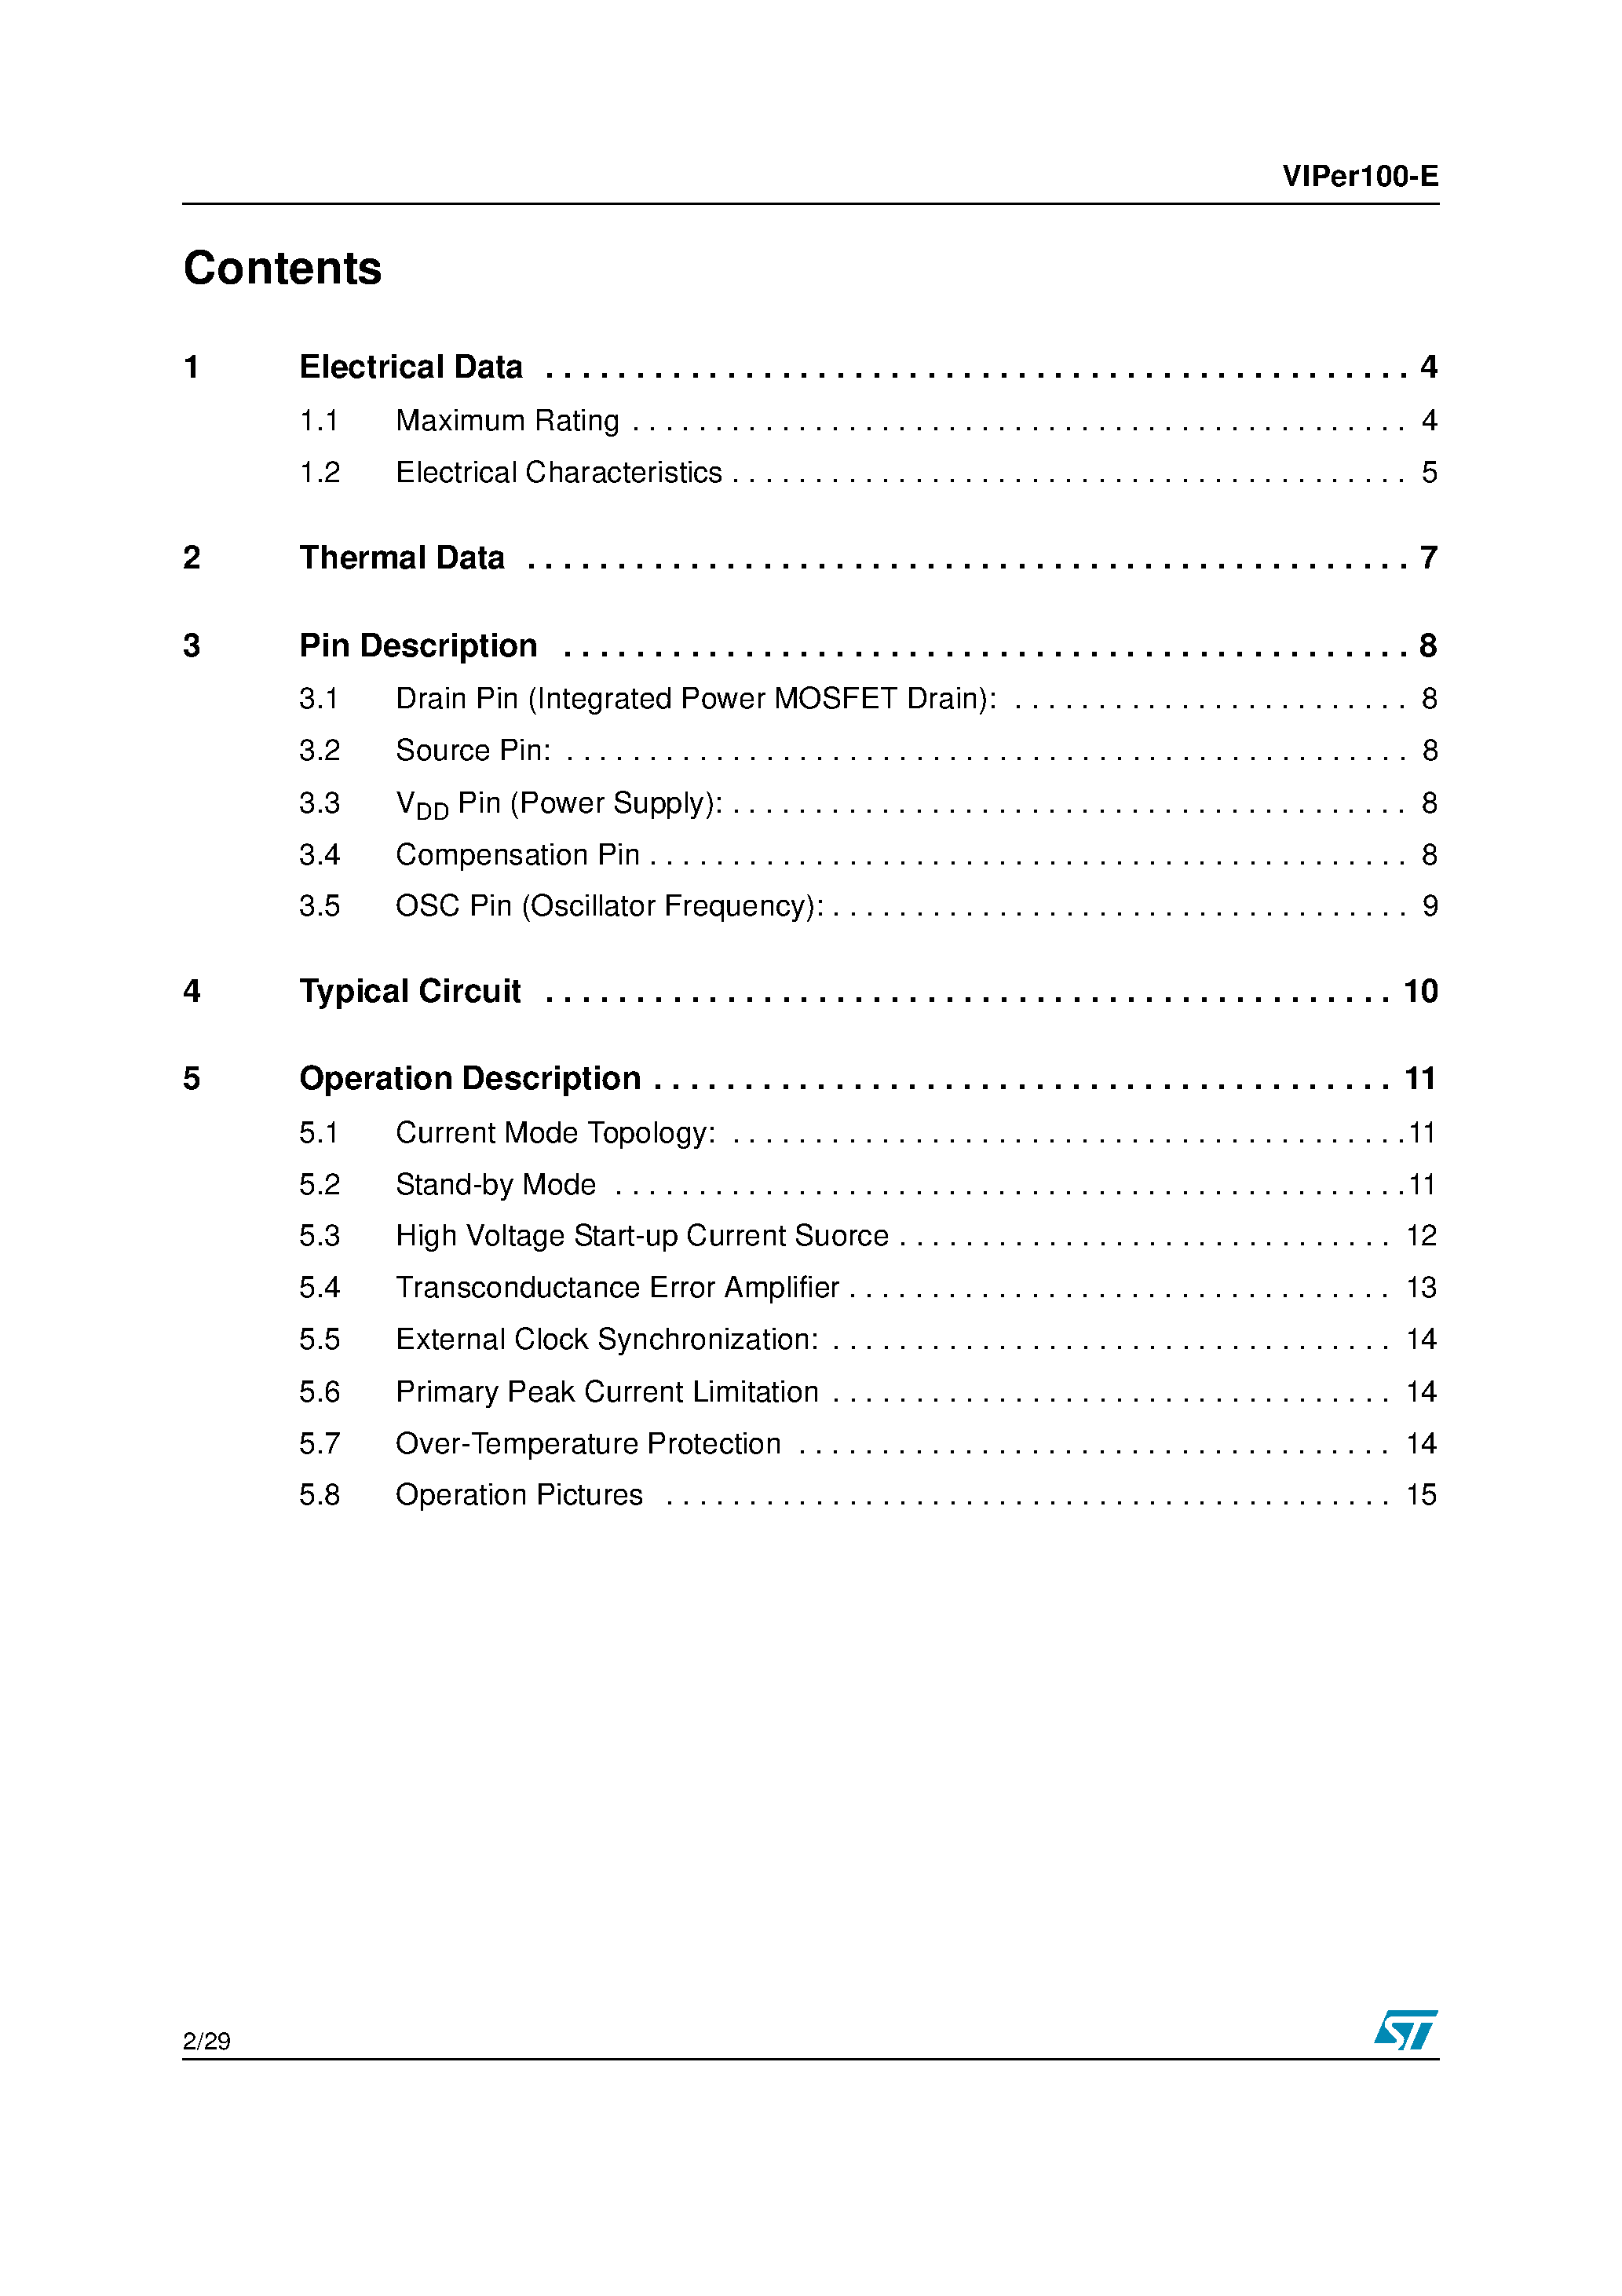 Datasheet VIPER100-E - SMPS PRIMARY I.C. page 2